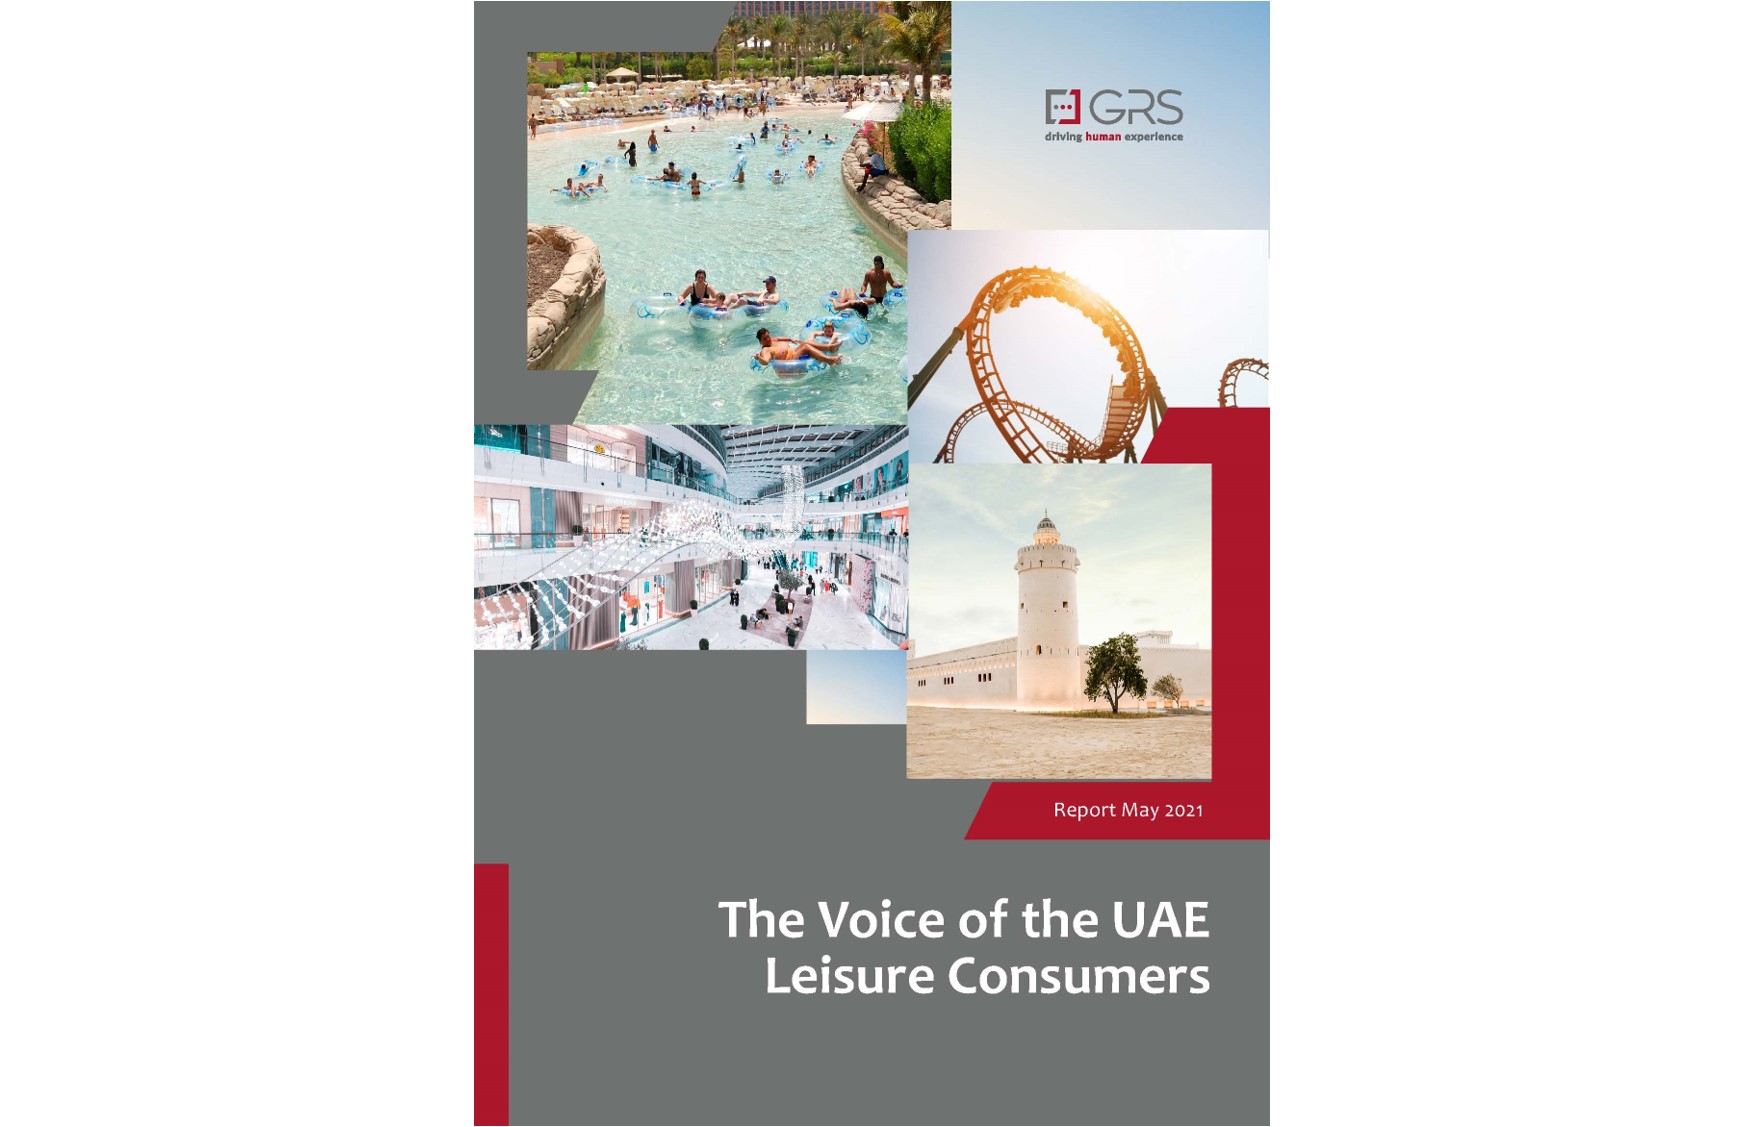 GRS The Voice of The UAE Leisure Consumers - Report 2021